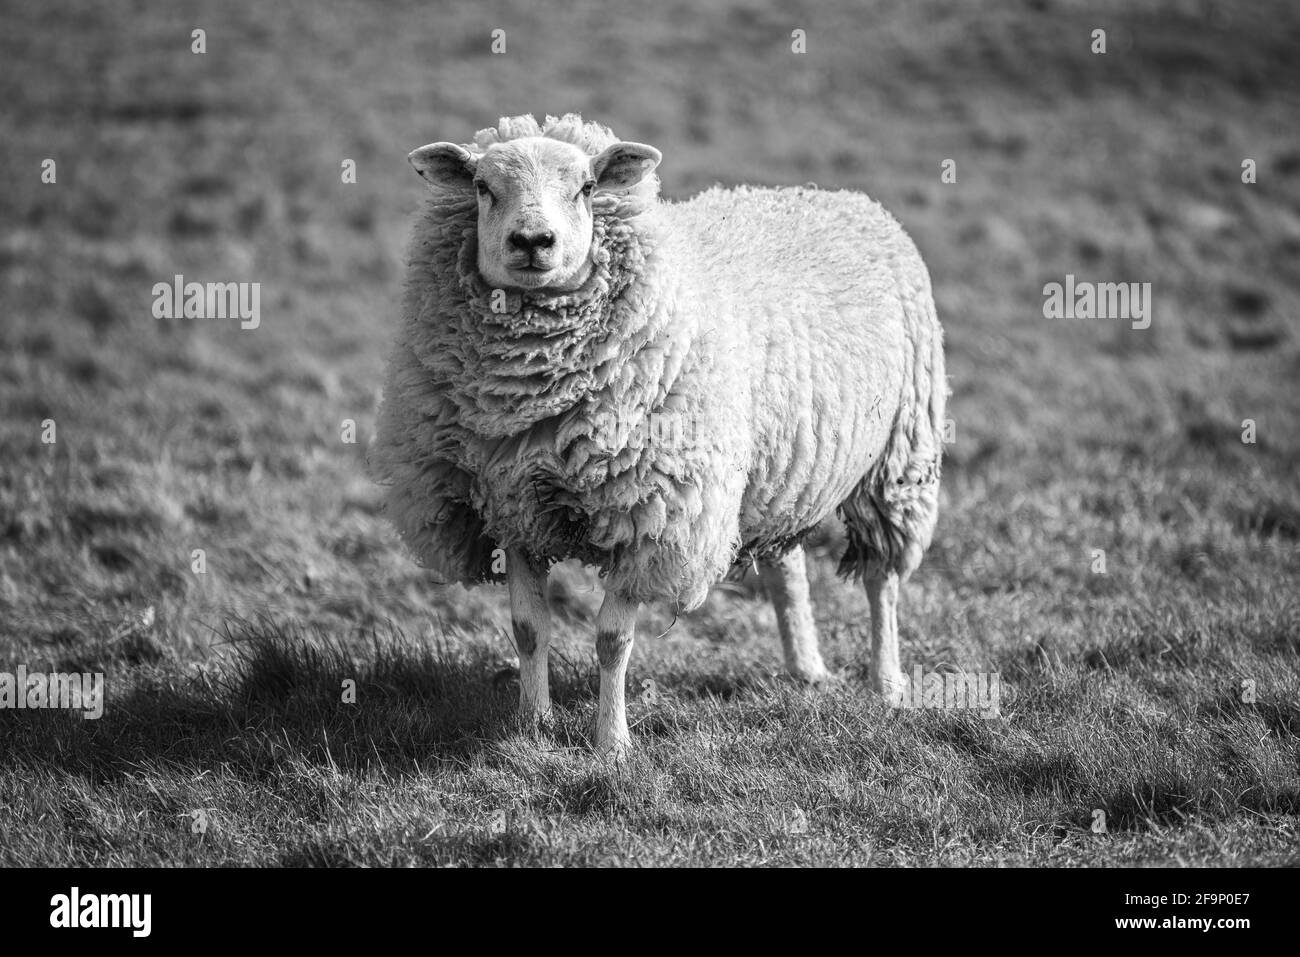 Woolly sheep with thick fleece in black and white Stock Photo